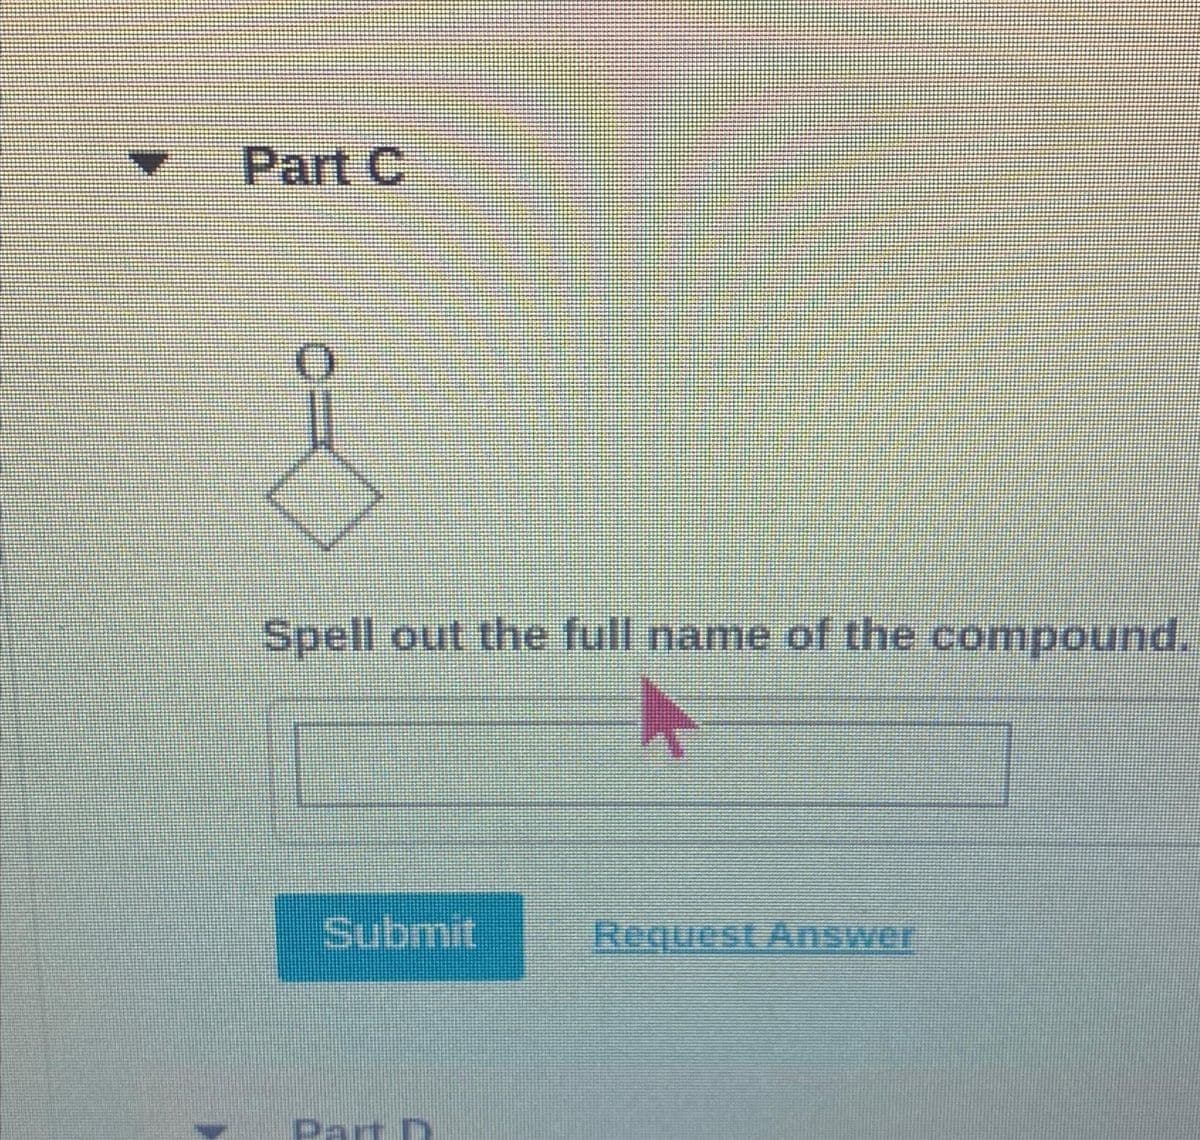 Part C
O
J
Spell out the full name of the compound.
Submit
FREEEEEEE
Part D
Request Answer